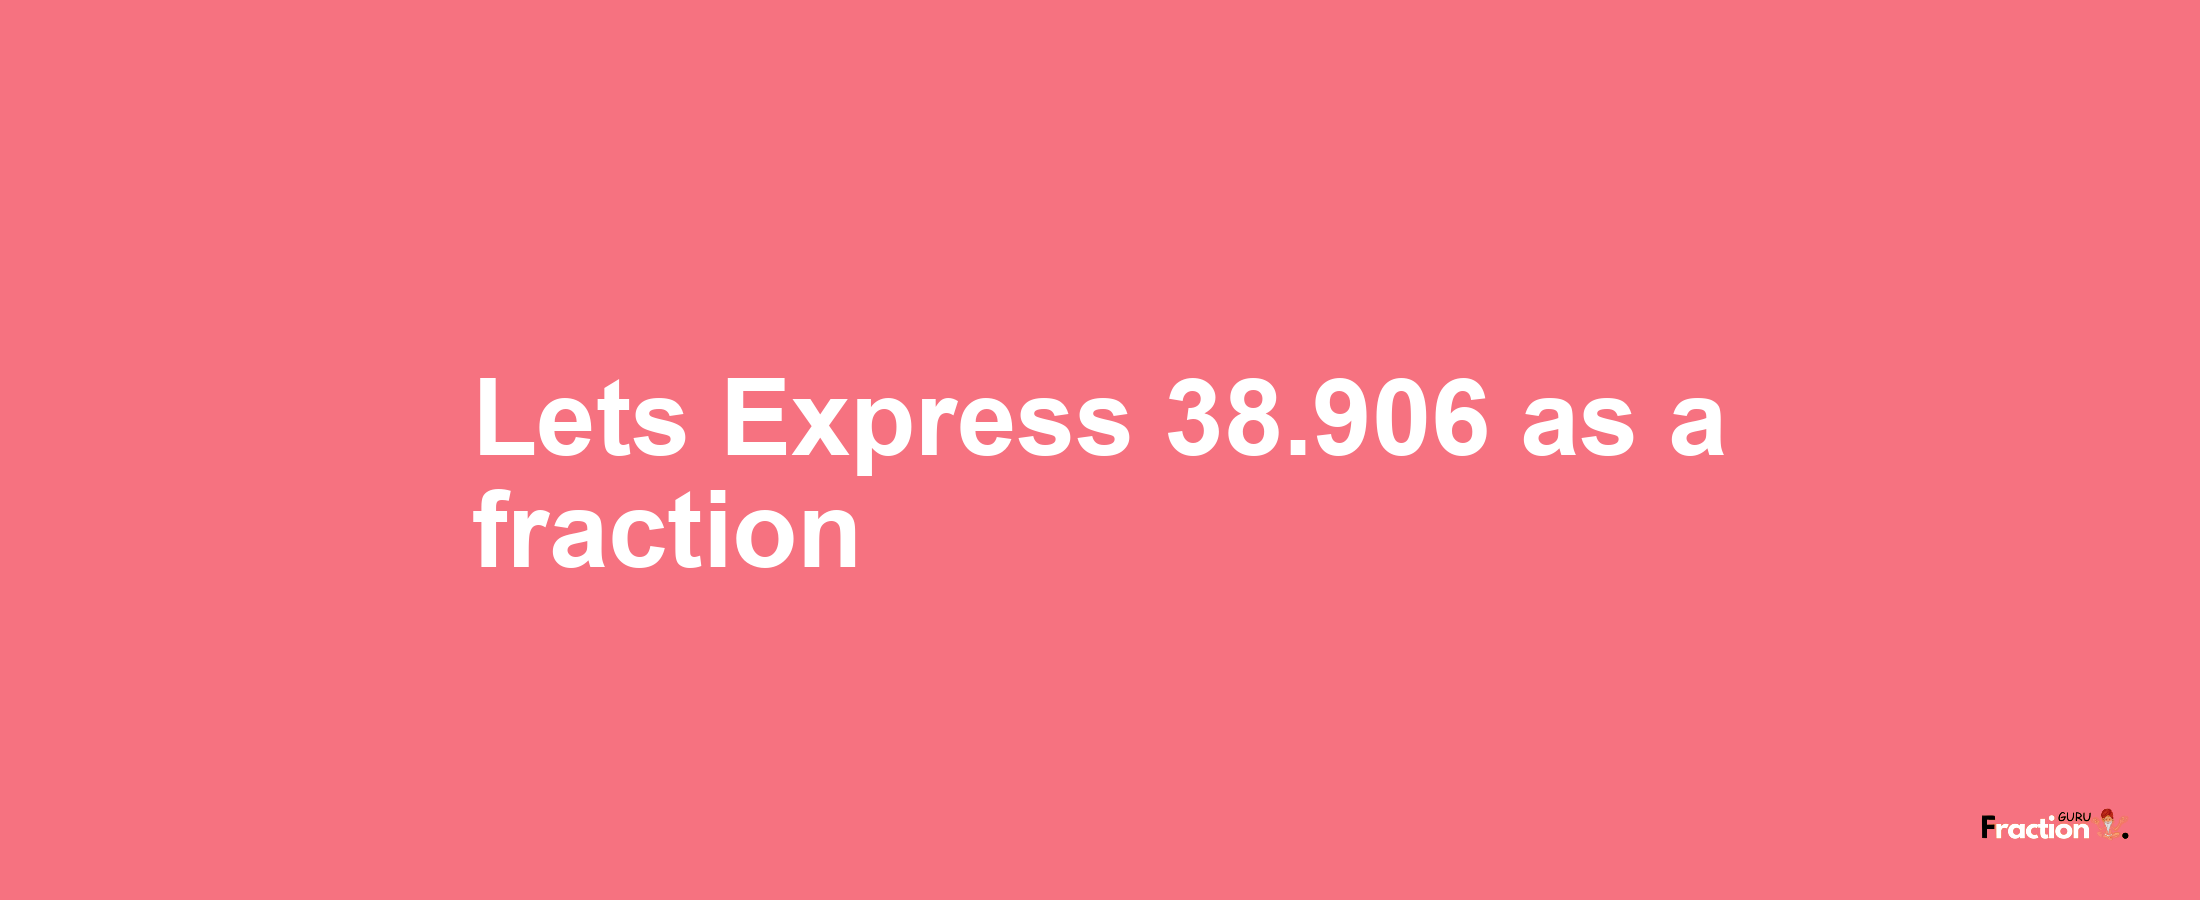 Lets Express 38.906 as afraction